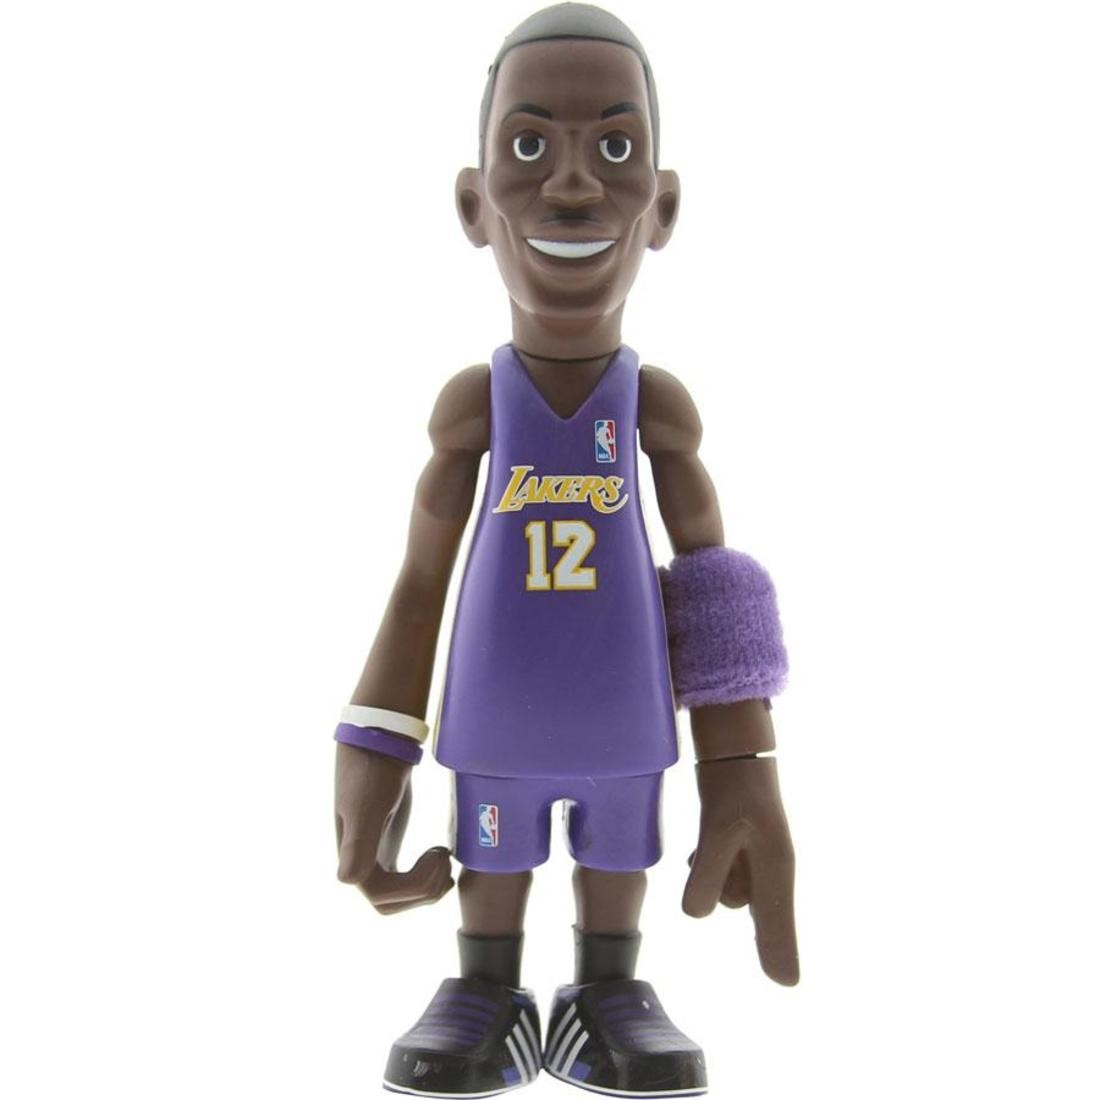 MINDstyle x CoolRain Dwight Howard NBA Collector Series 2 Figure (purple)